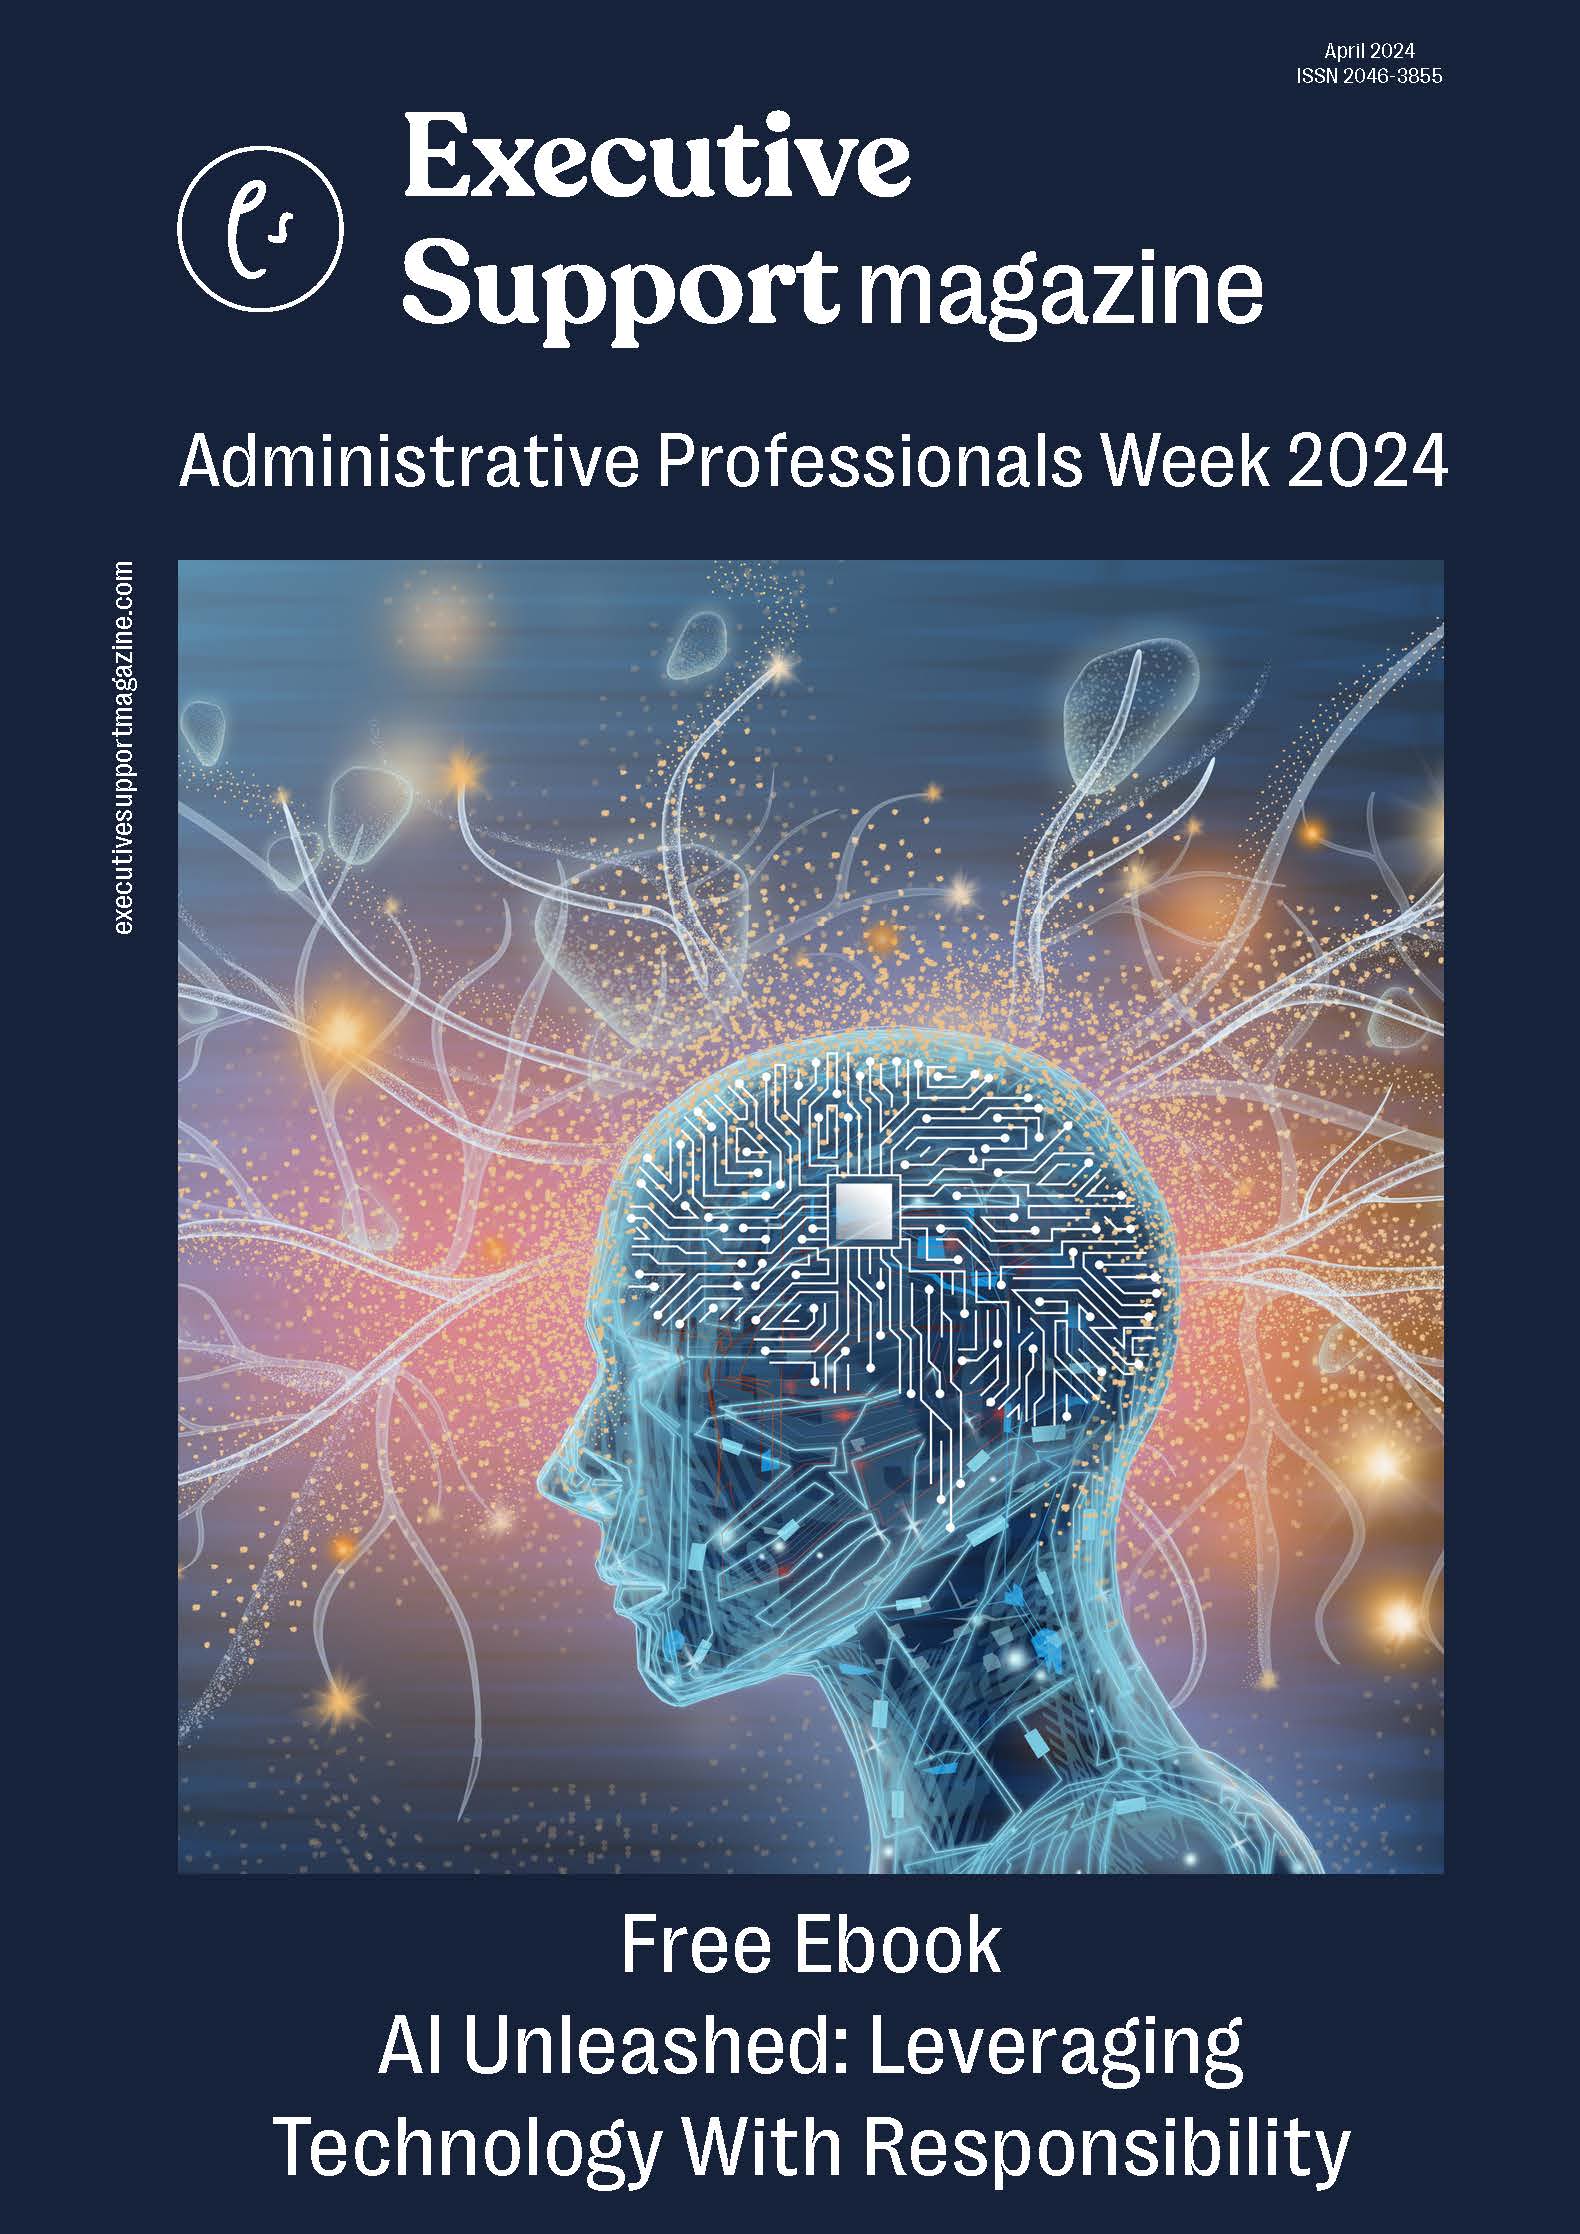 FREE Ebook for Administrative Professionals Week 2024